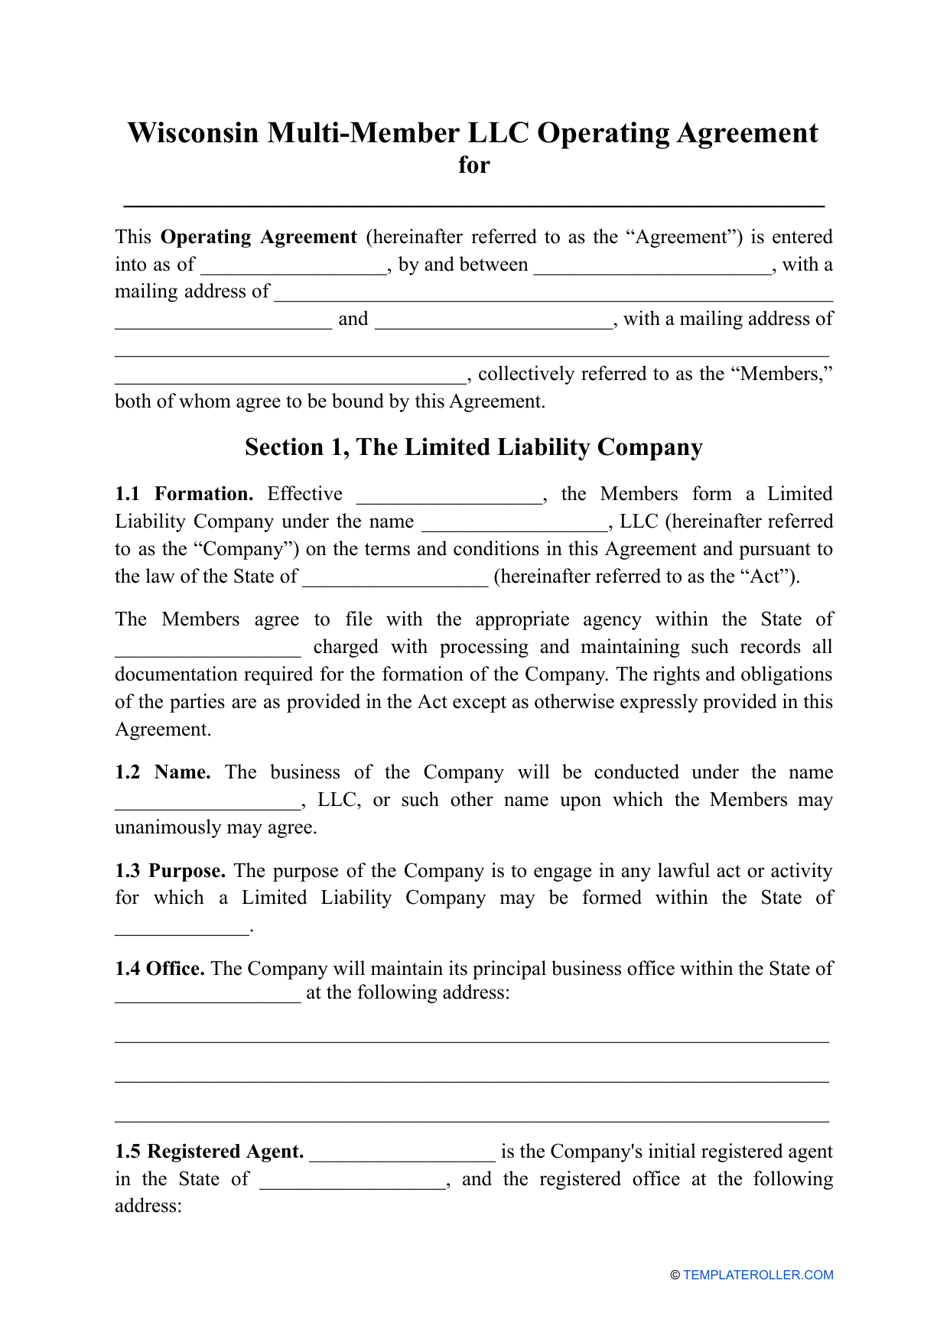 Multi-Member LLC Operating Agreement Template - Wisconsin, Page 1